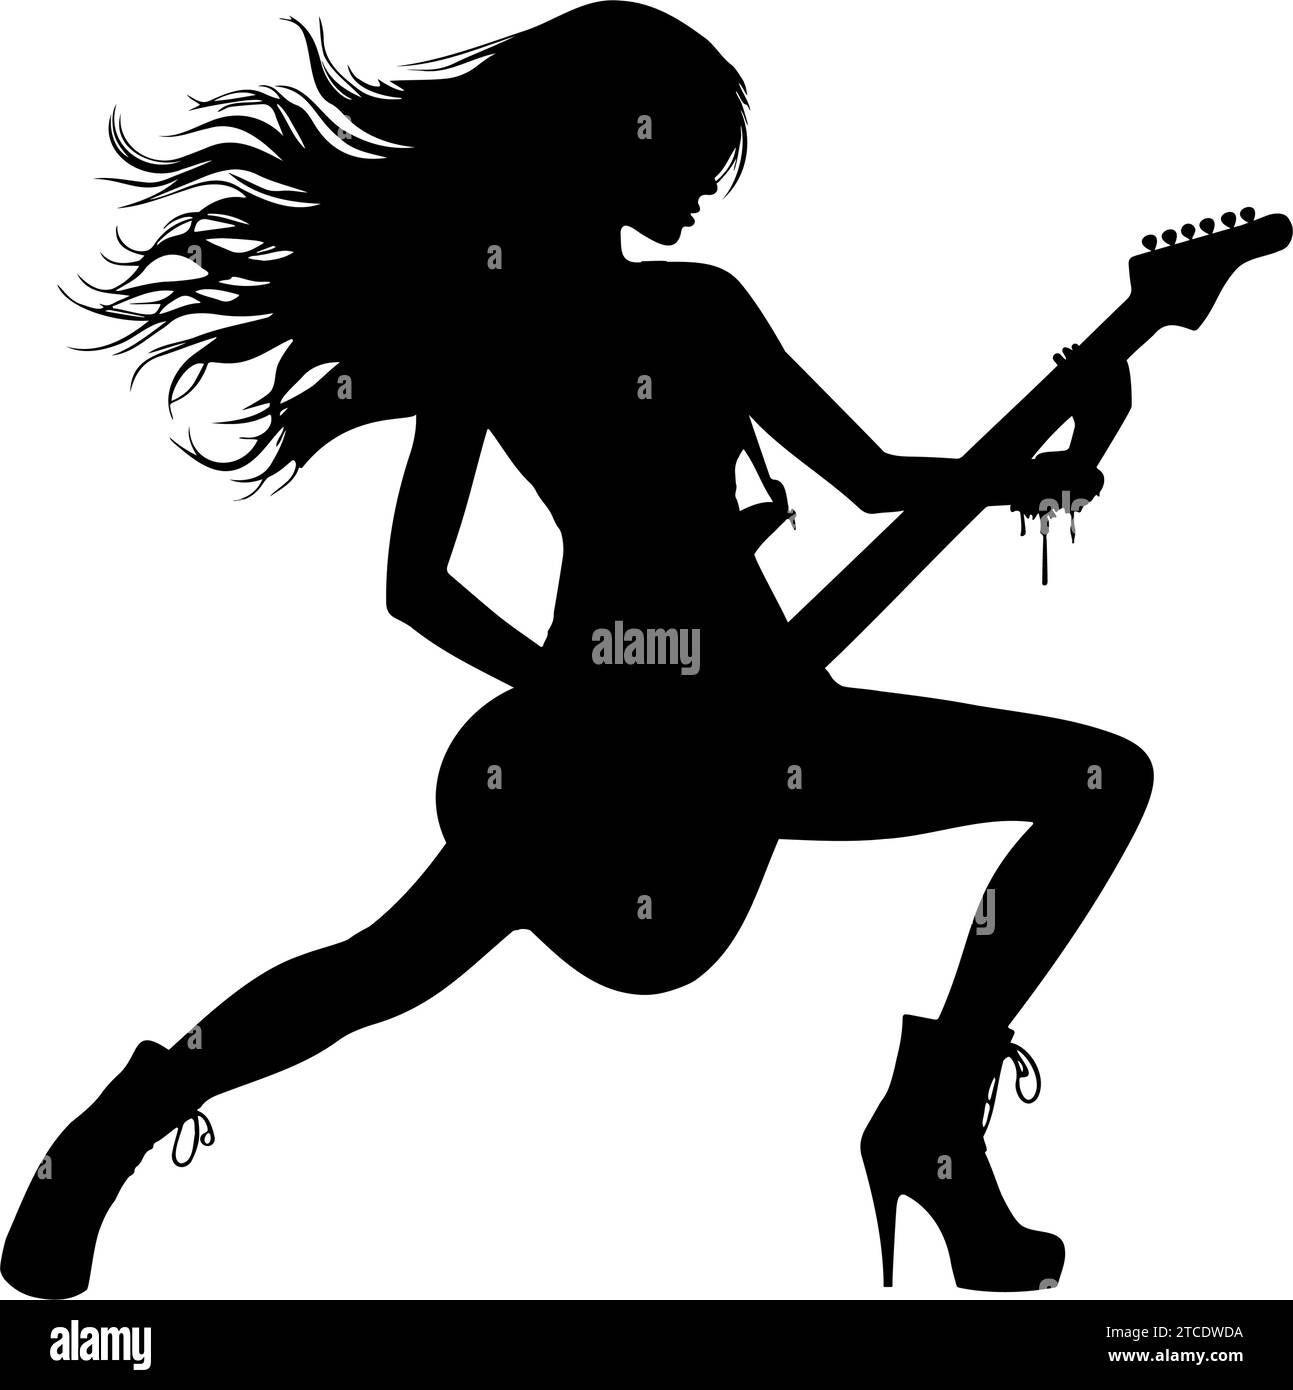 Silhouette of a woman playing rock guitar. vector illustration Stock Vector